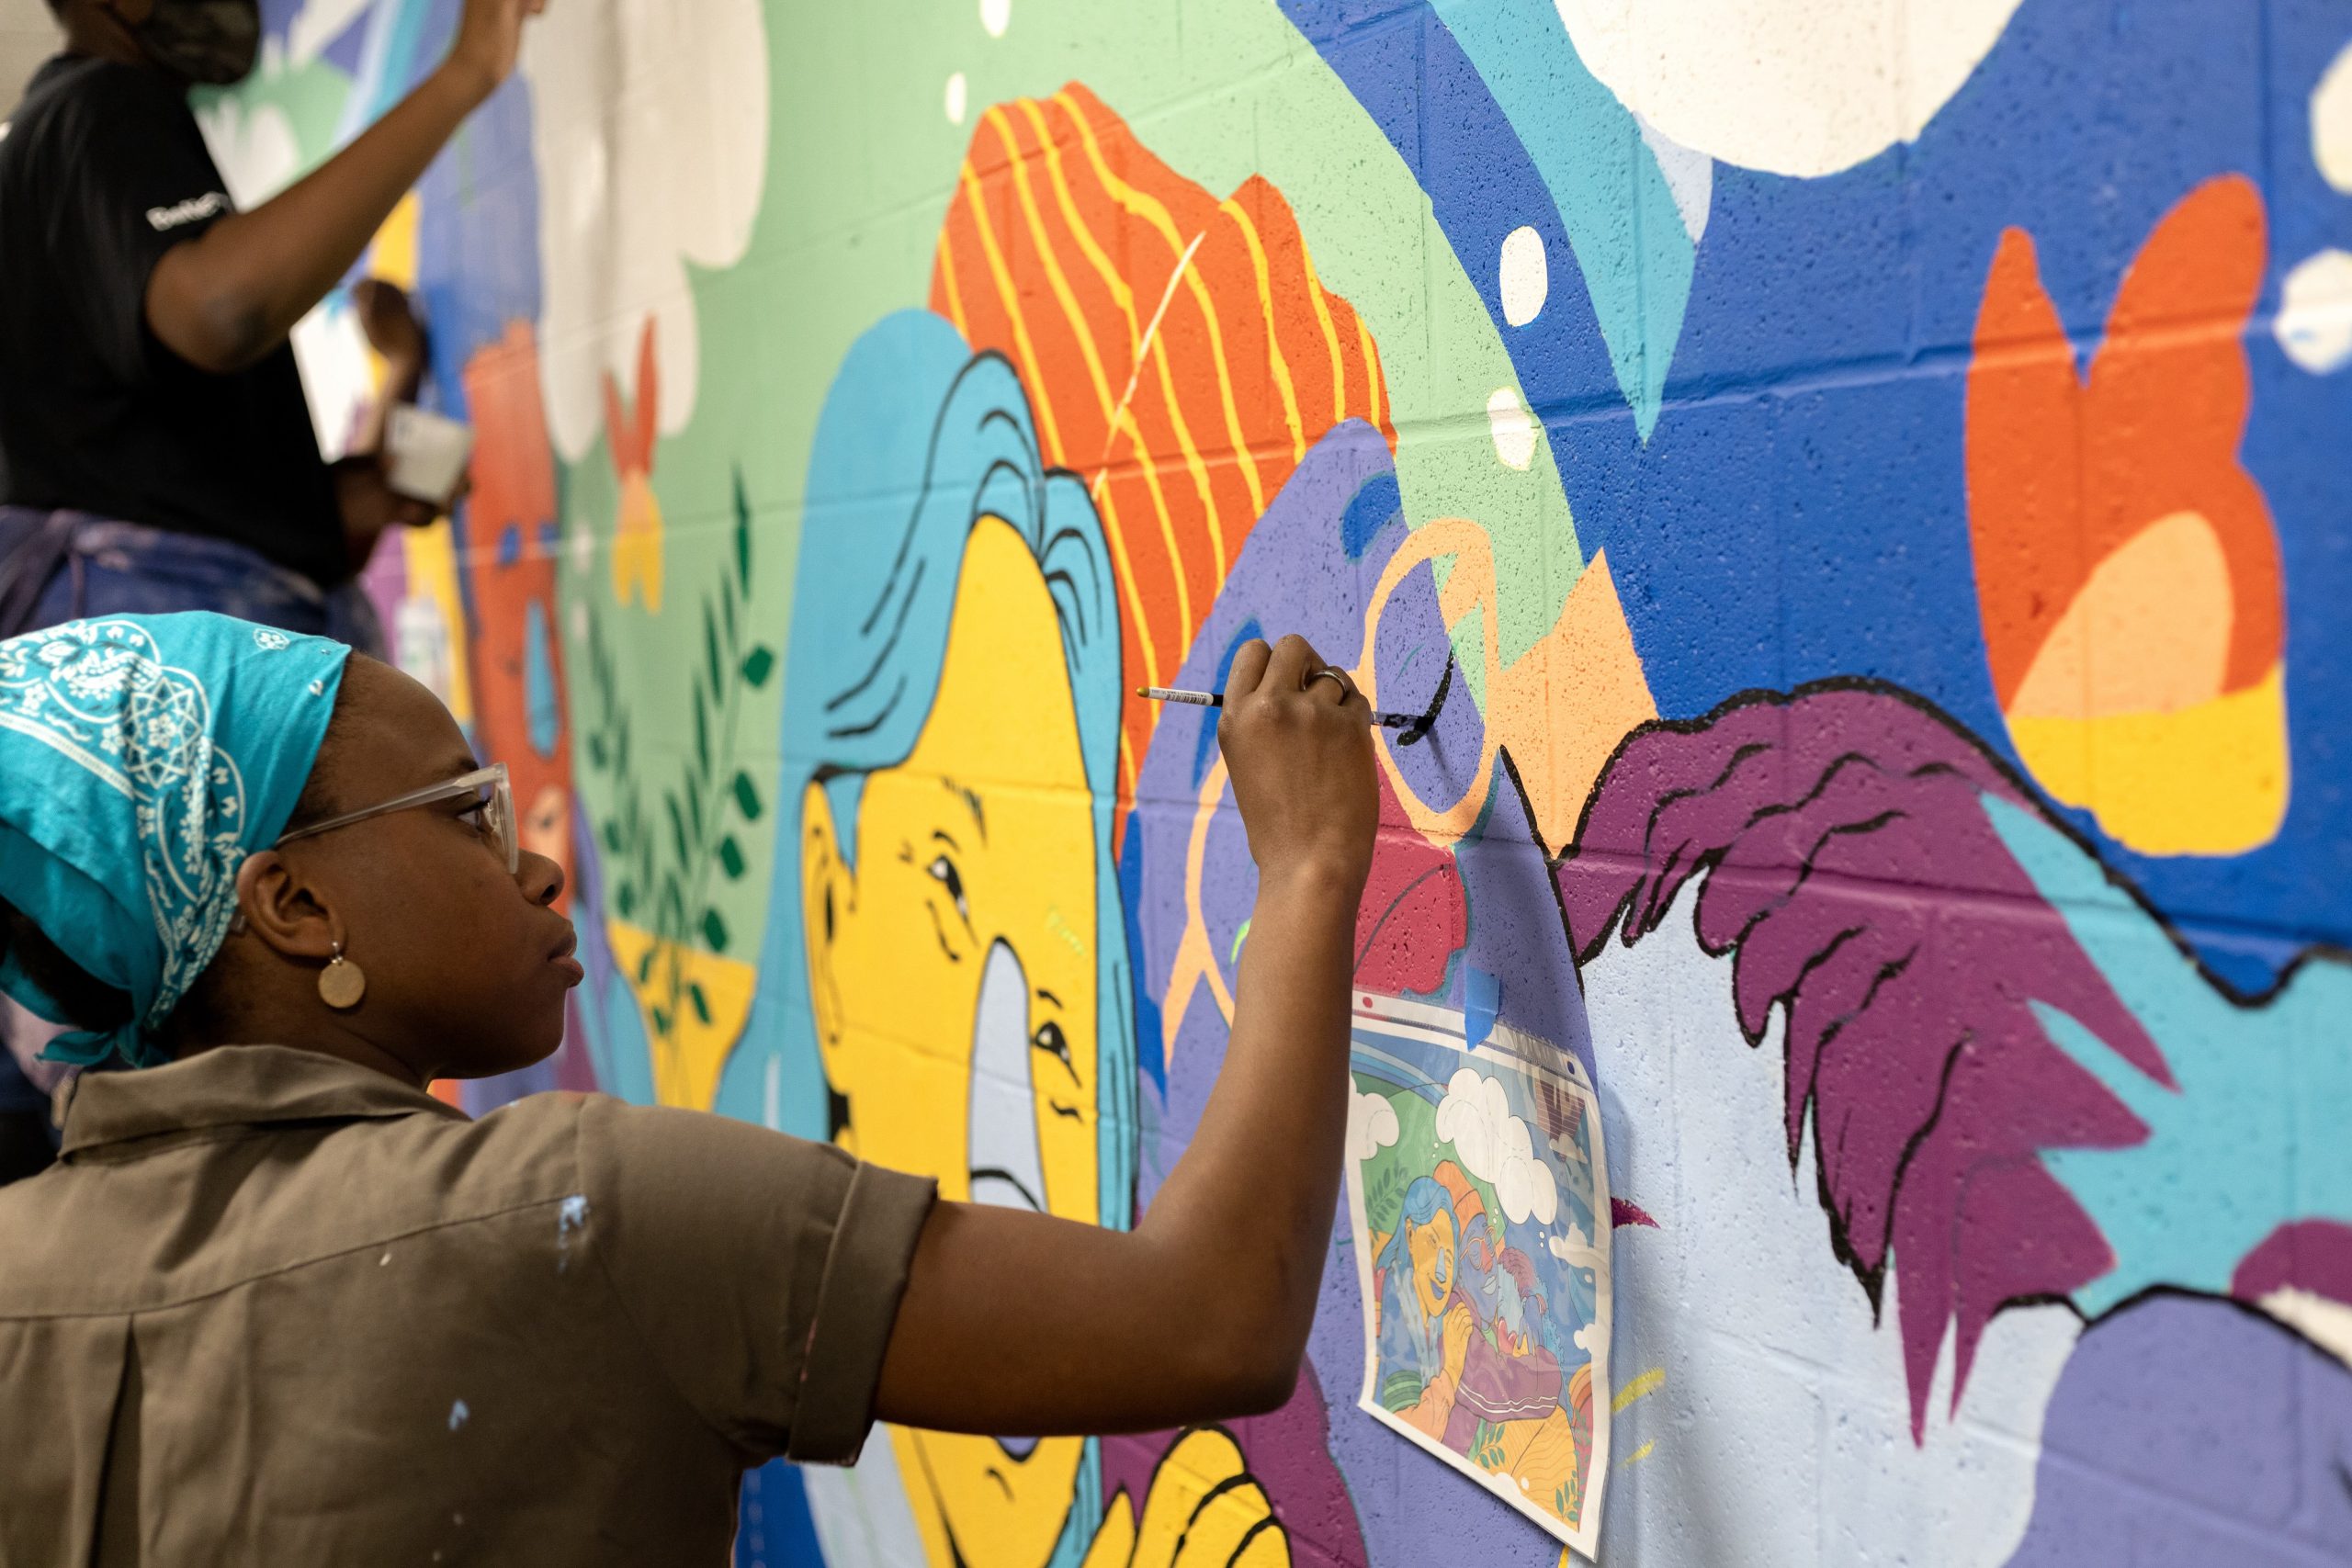 a person in a green shirt and blue bandana paints on a colorful brick wall